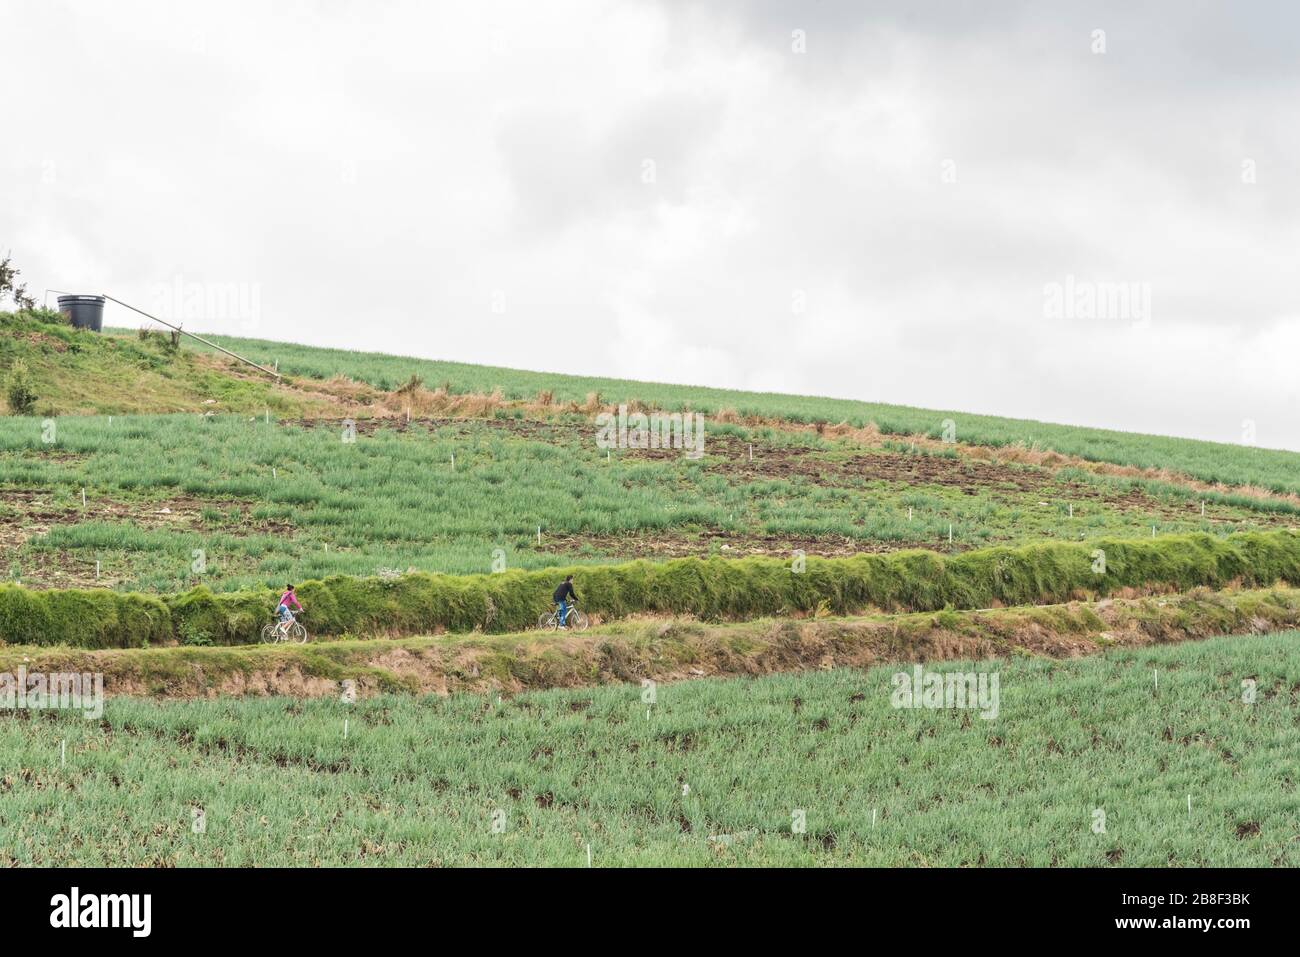 Aquitania, Boyaca / Colombia; April 8, 2018: Rural Andean landscape, couple of people cycling on a country road, surrounded by welsh onion fields, All Stock Photo